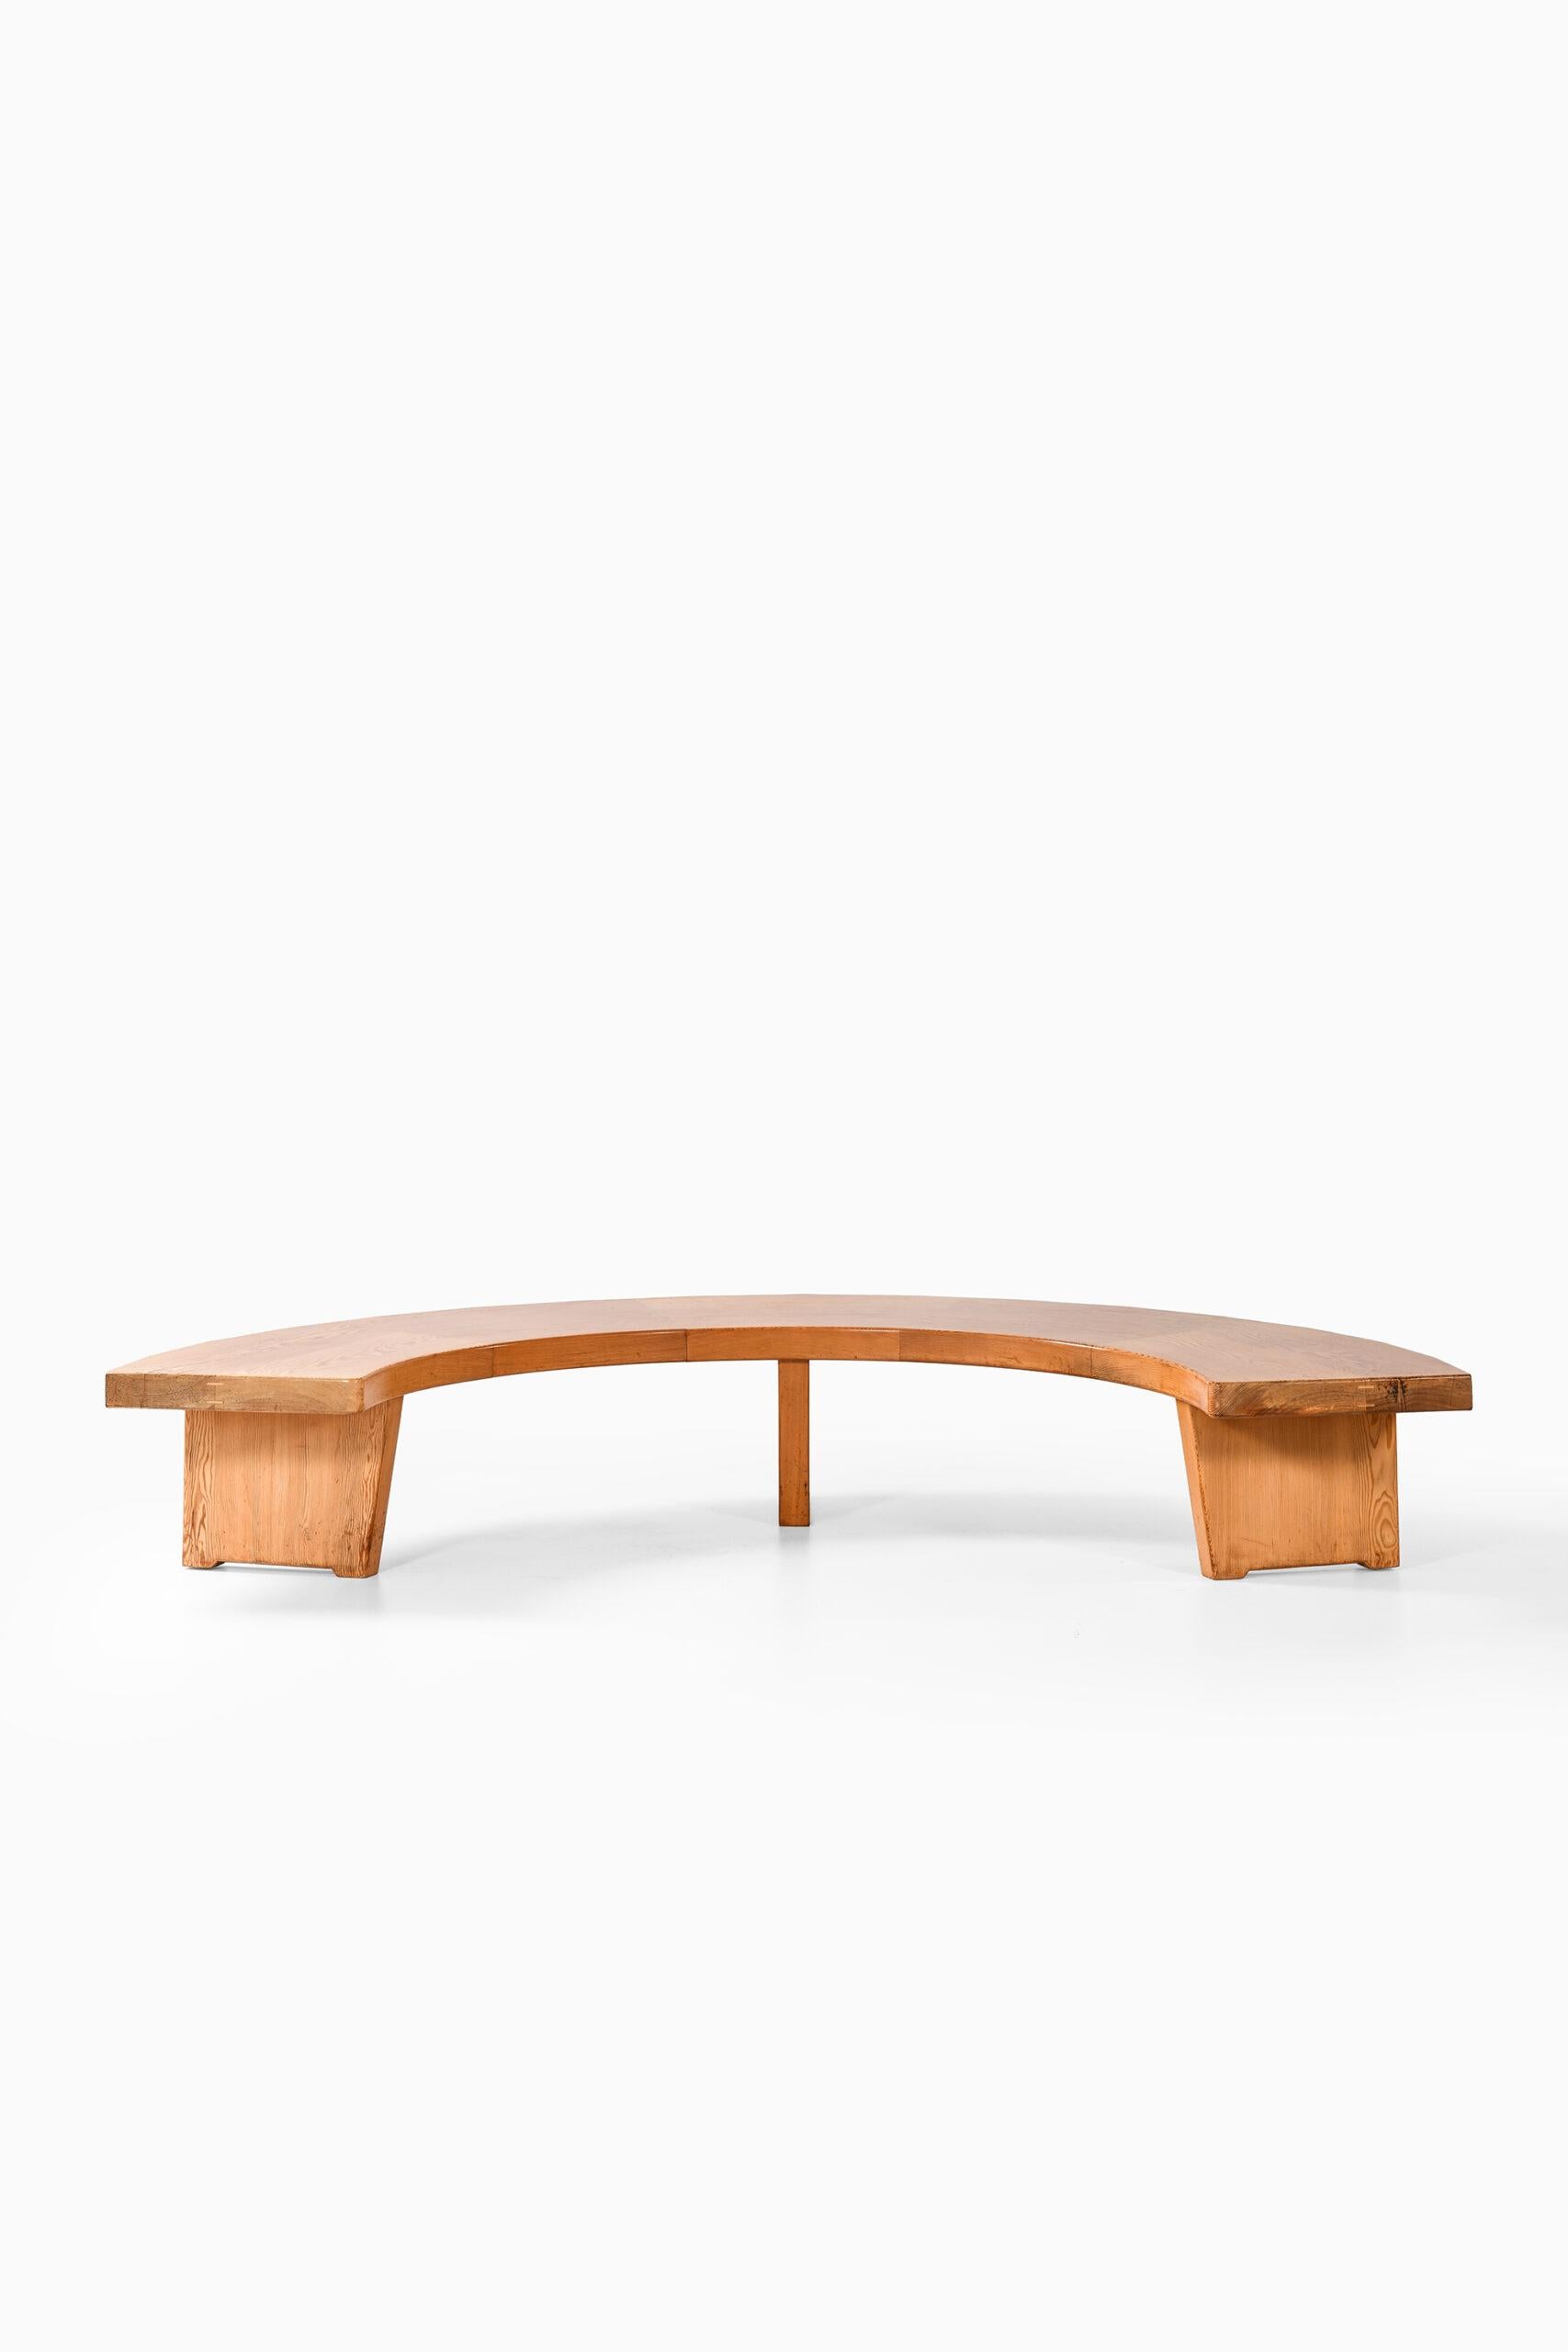 Rare and large bench by unknown designer. Probably produced in Sweden.